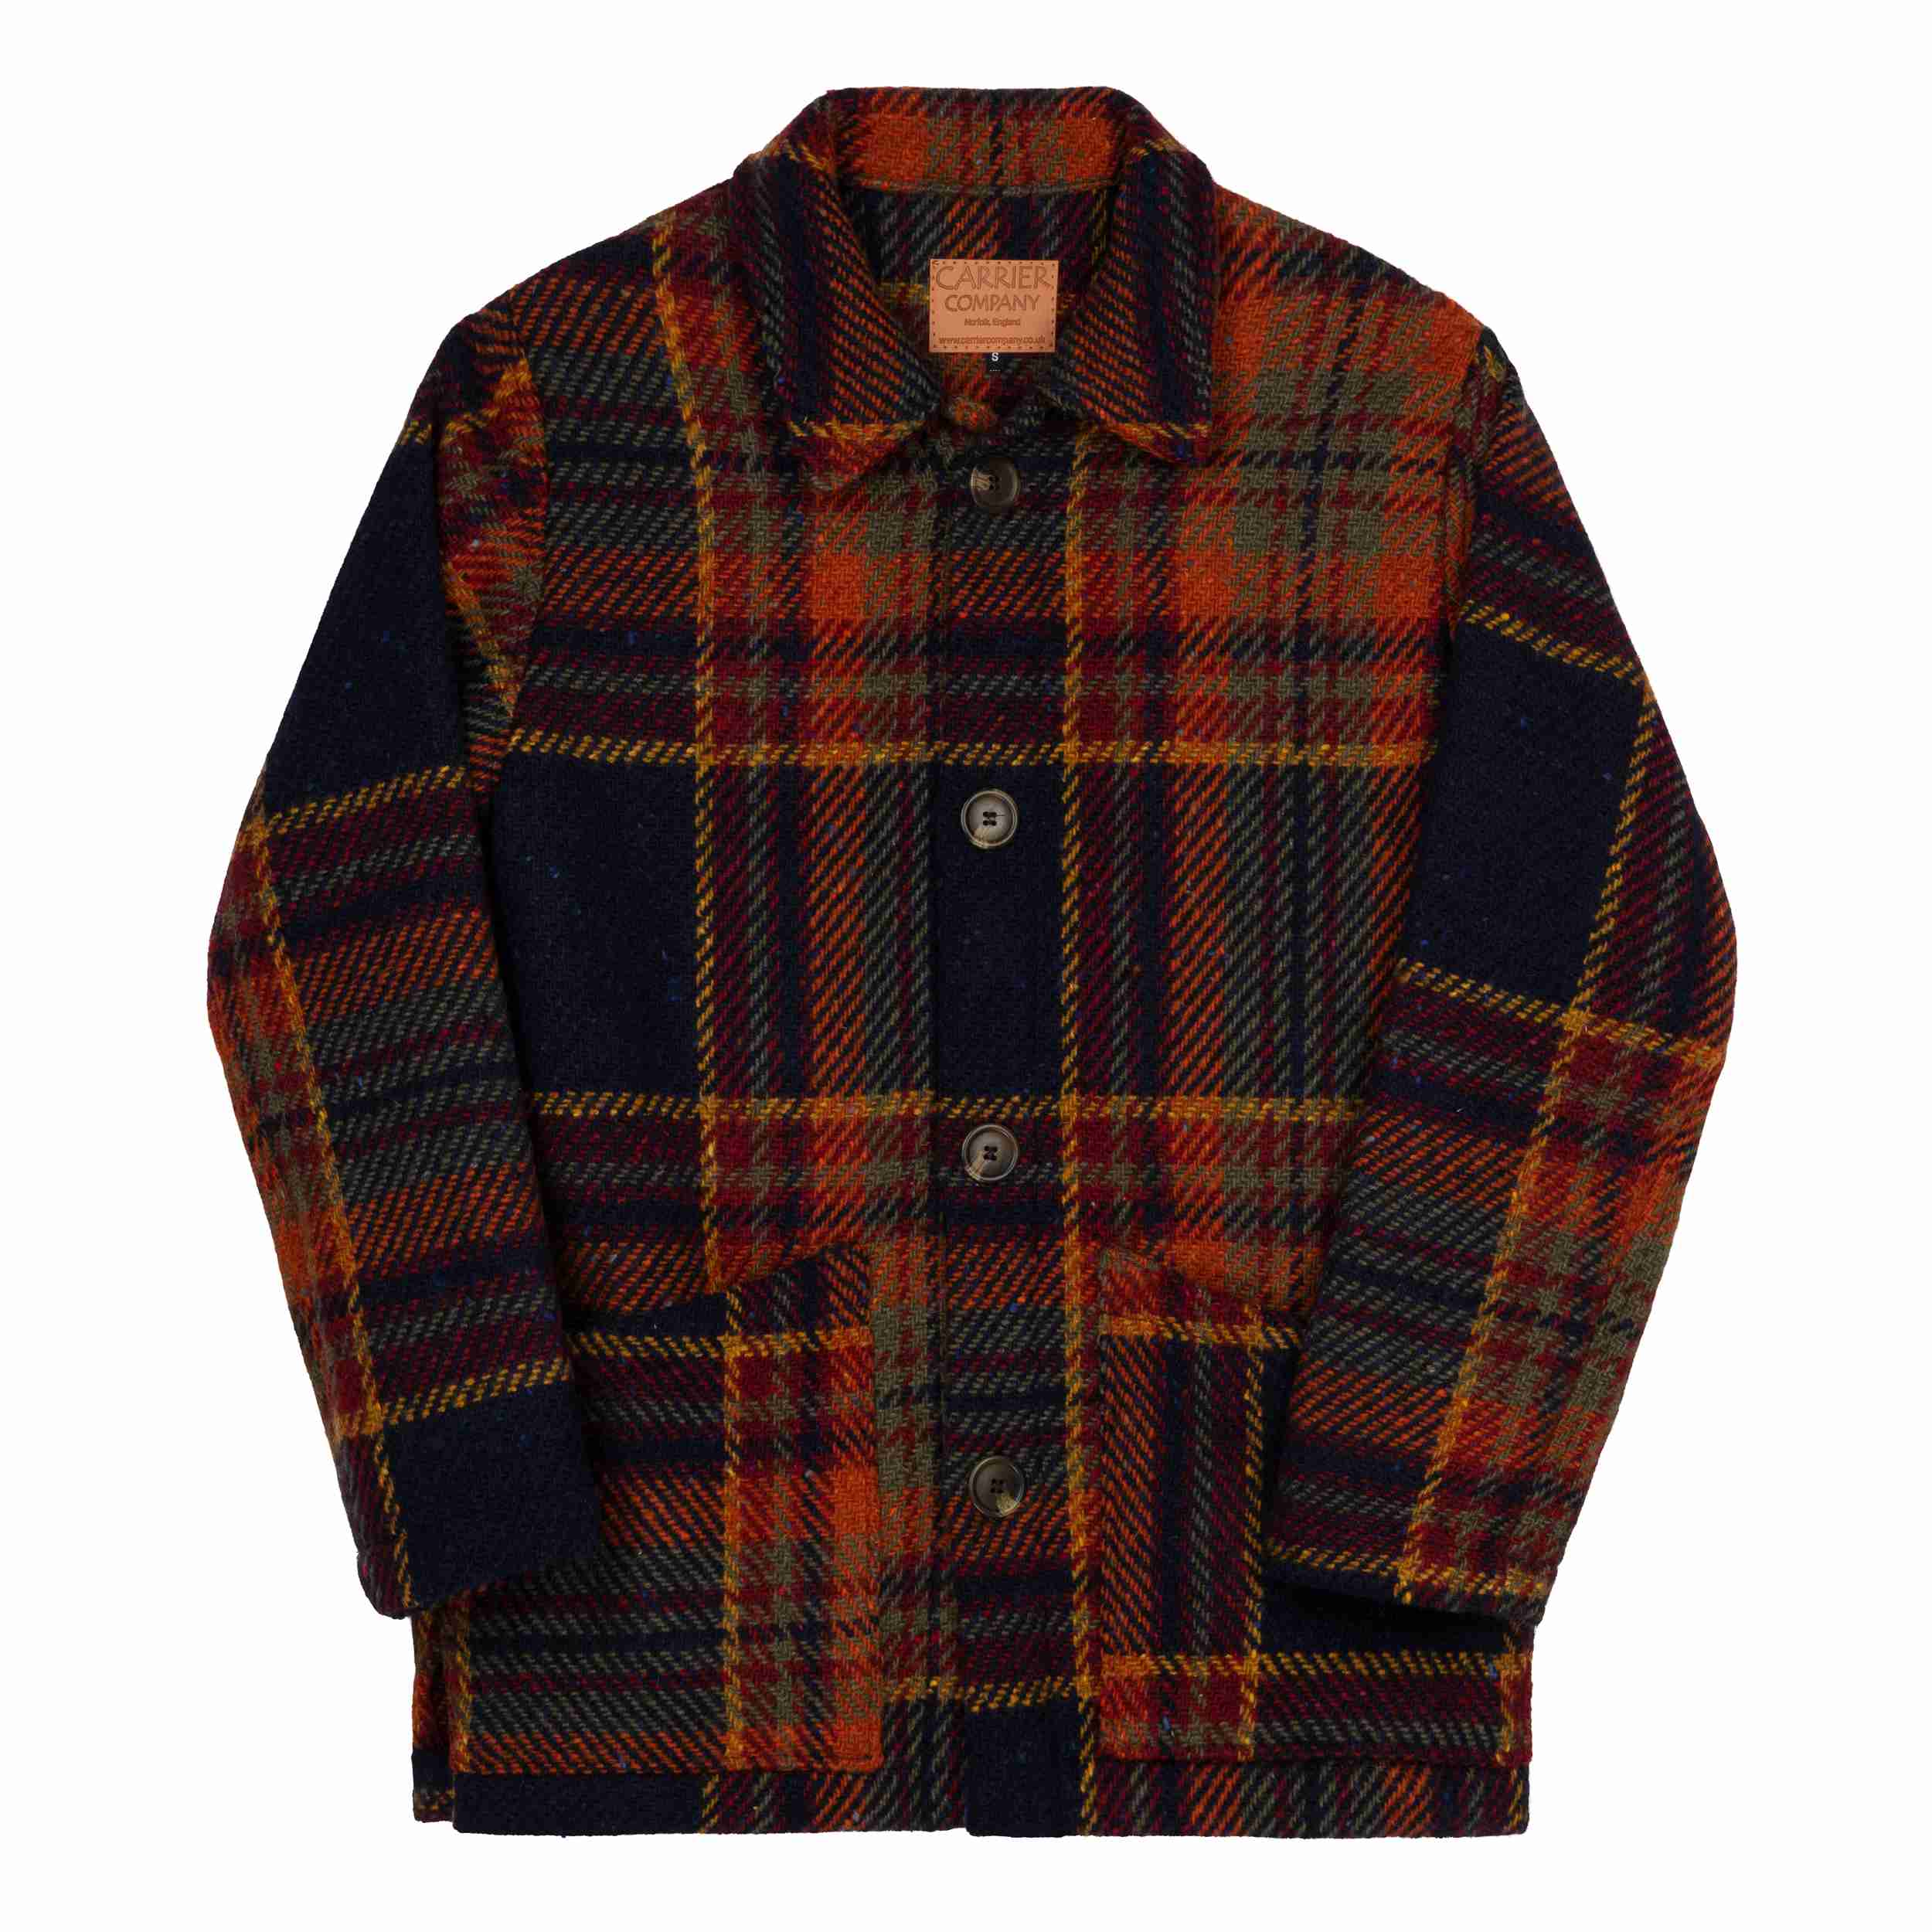 Carrier Company Celtic Wool Jacket in Navy and Rust